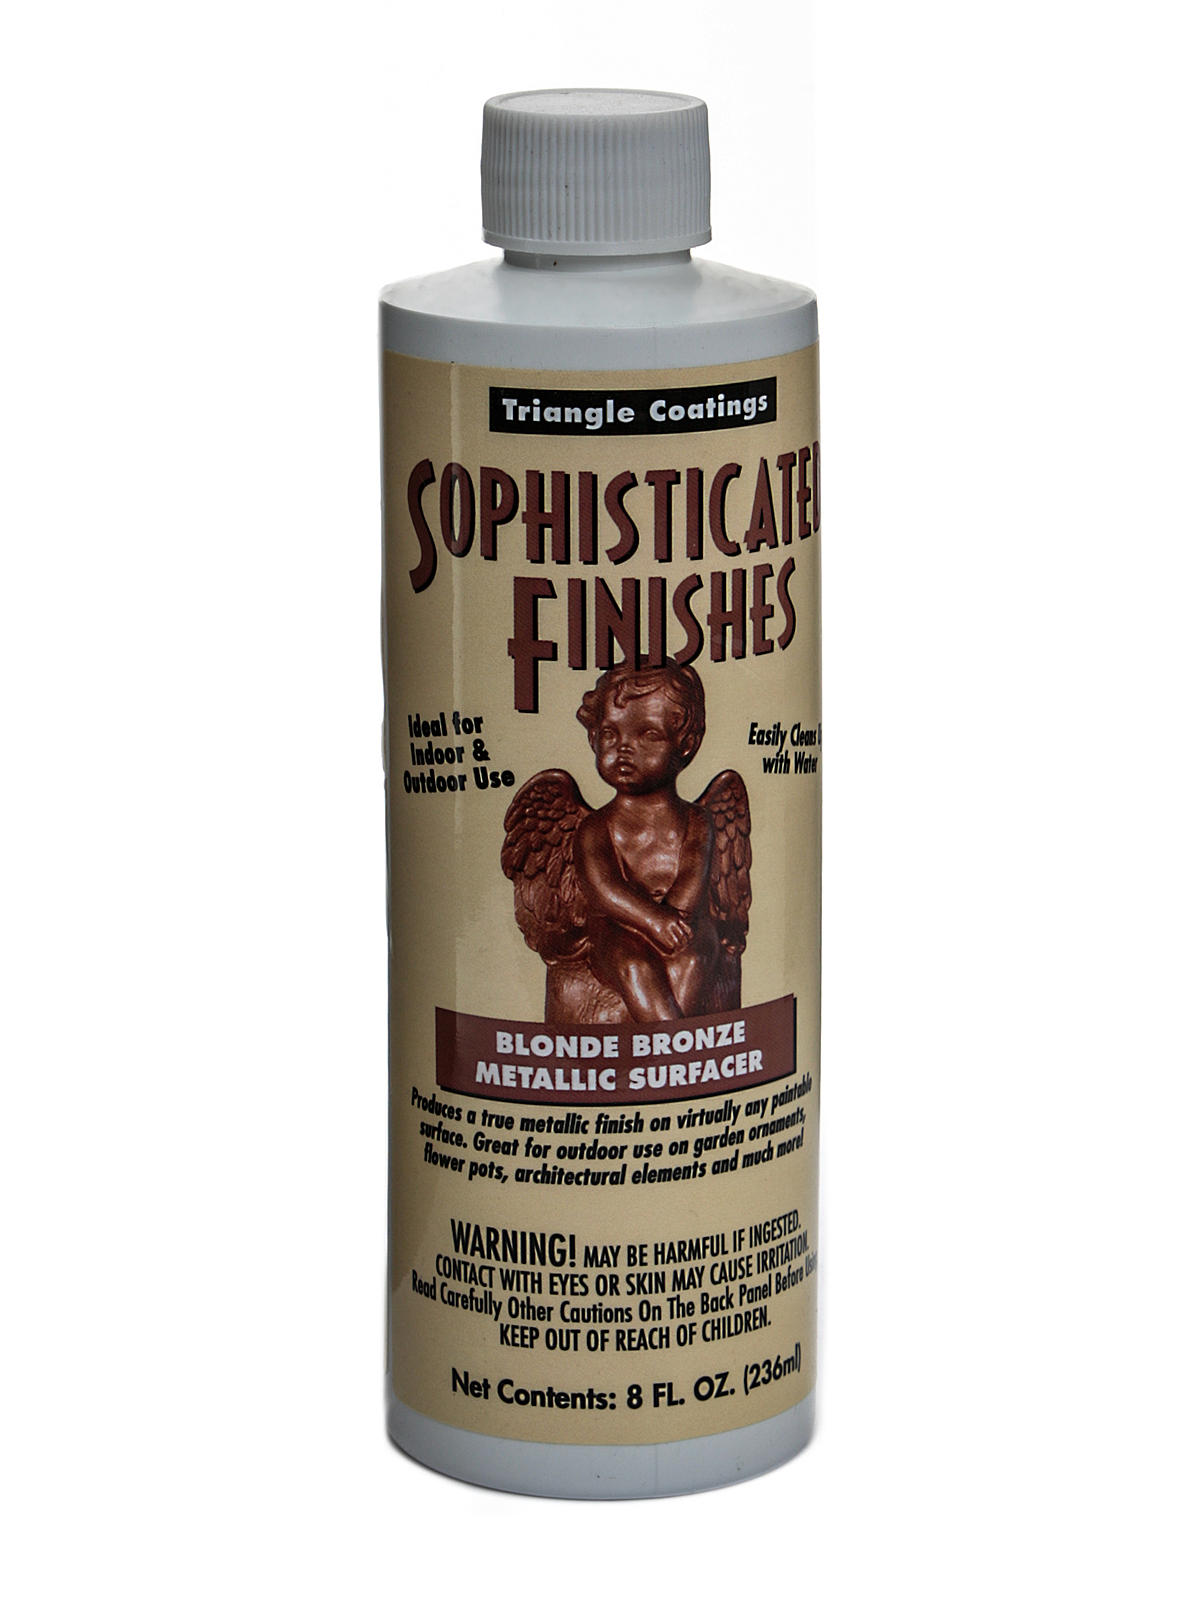 Sophisticated Finishes Metallic Surfacers Blonde Bronze 8 Oz.